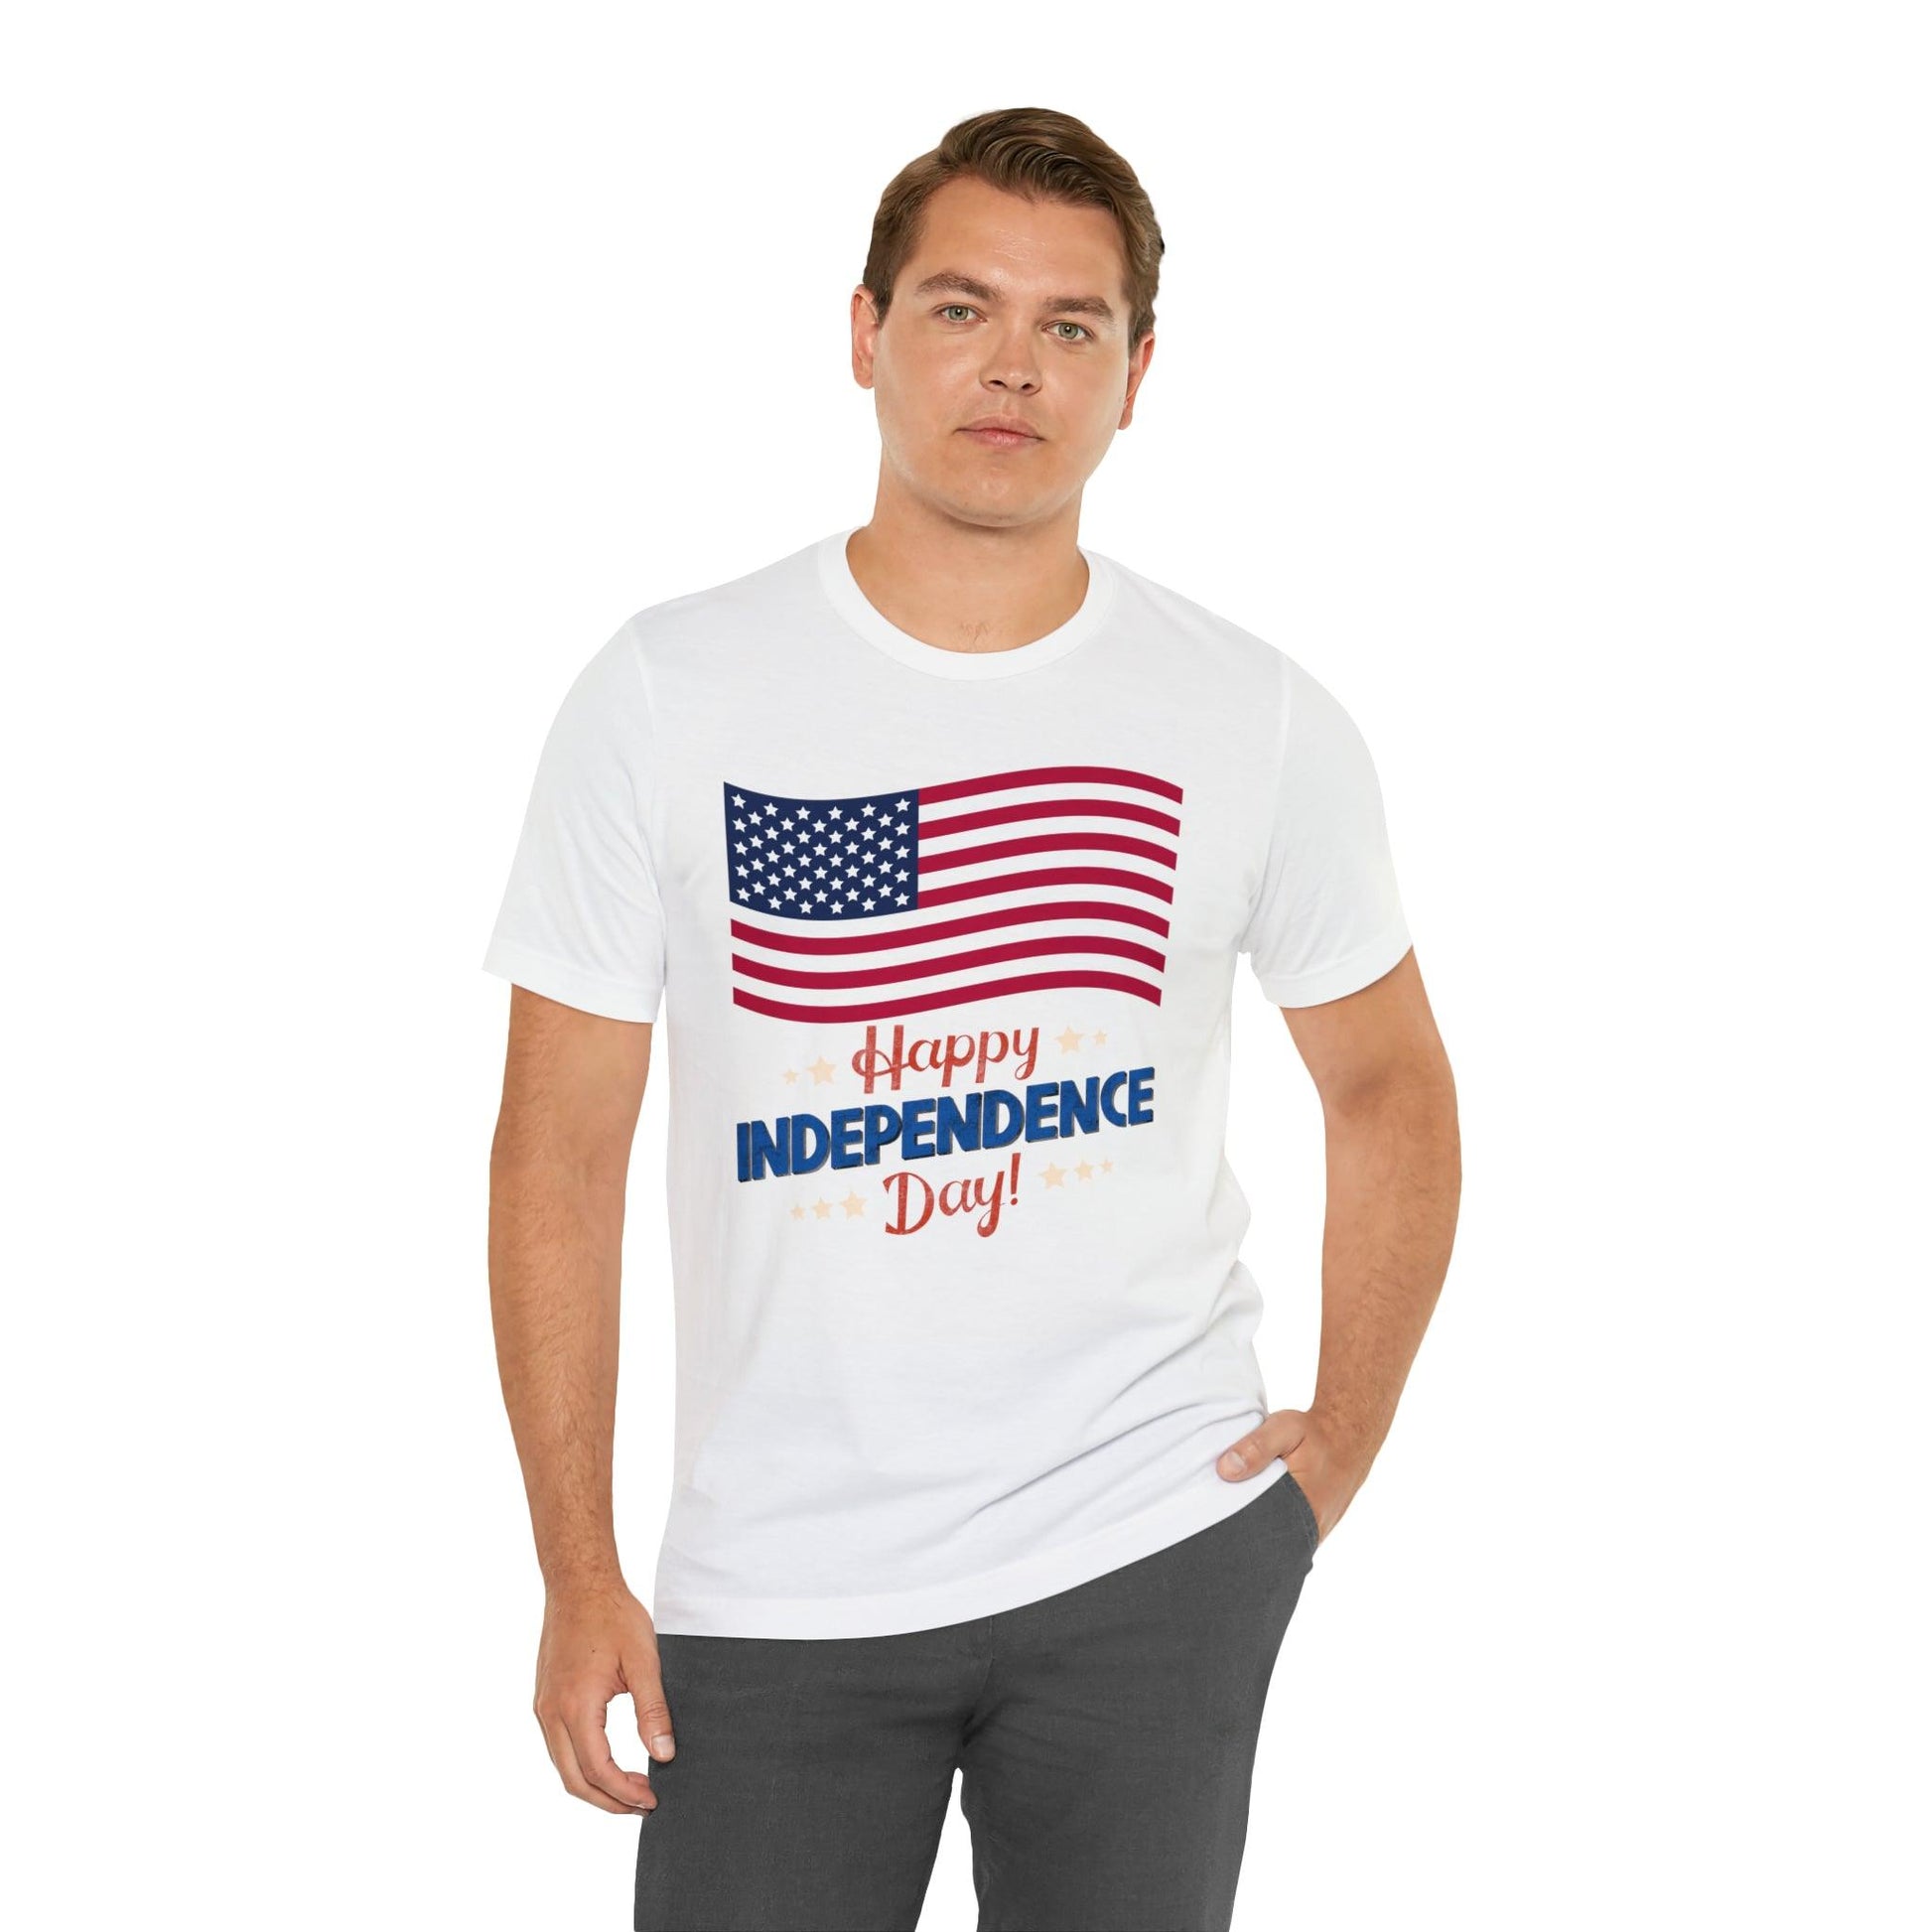 Independence Day shirt, American flag shirt, Red, white, and blue shirt, 4th of July clothing - Giftsmojo